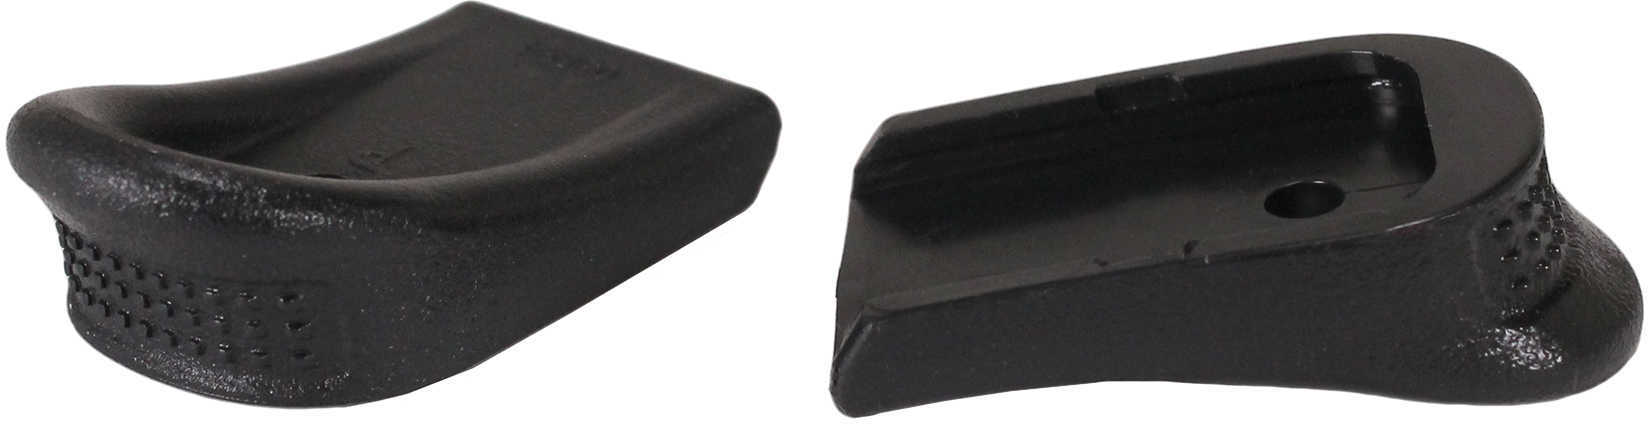 Pachmayr 03894 Grip Extension for Glock Mid/Full Size Polymer Black Finish 2 Pack